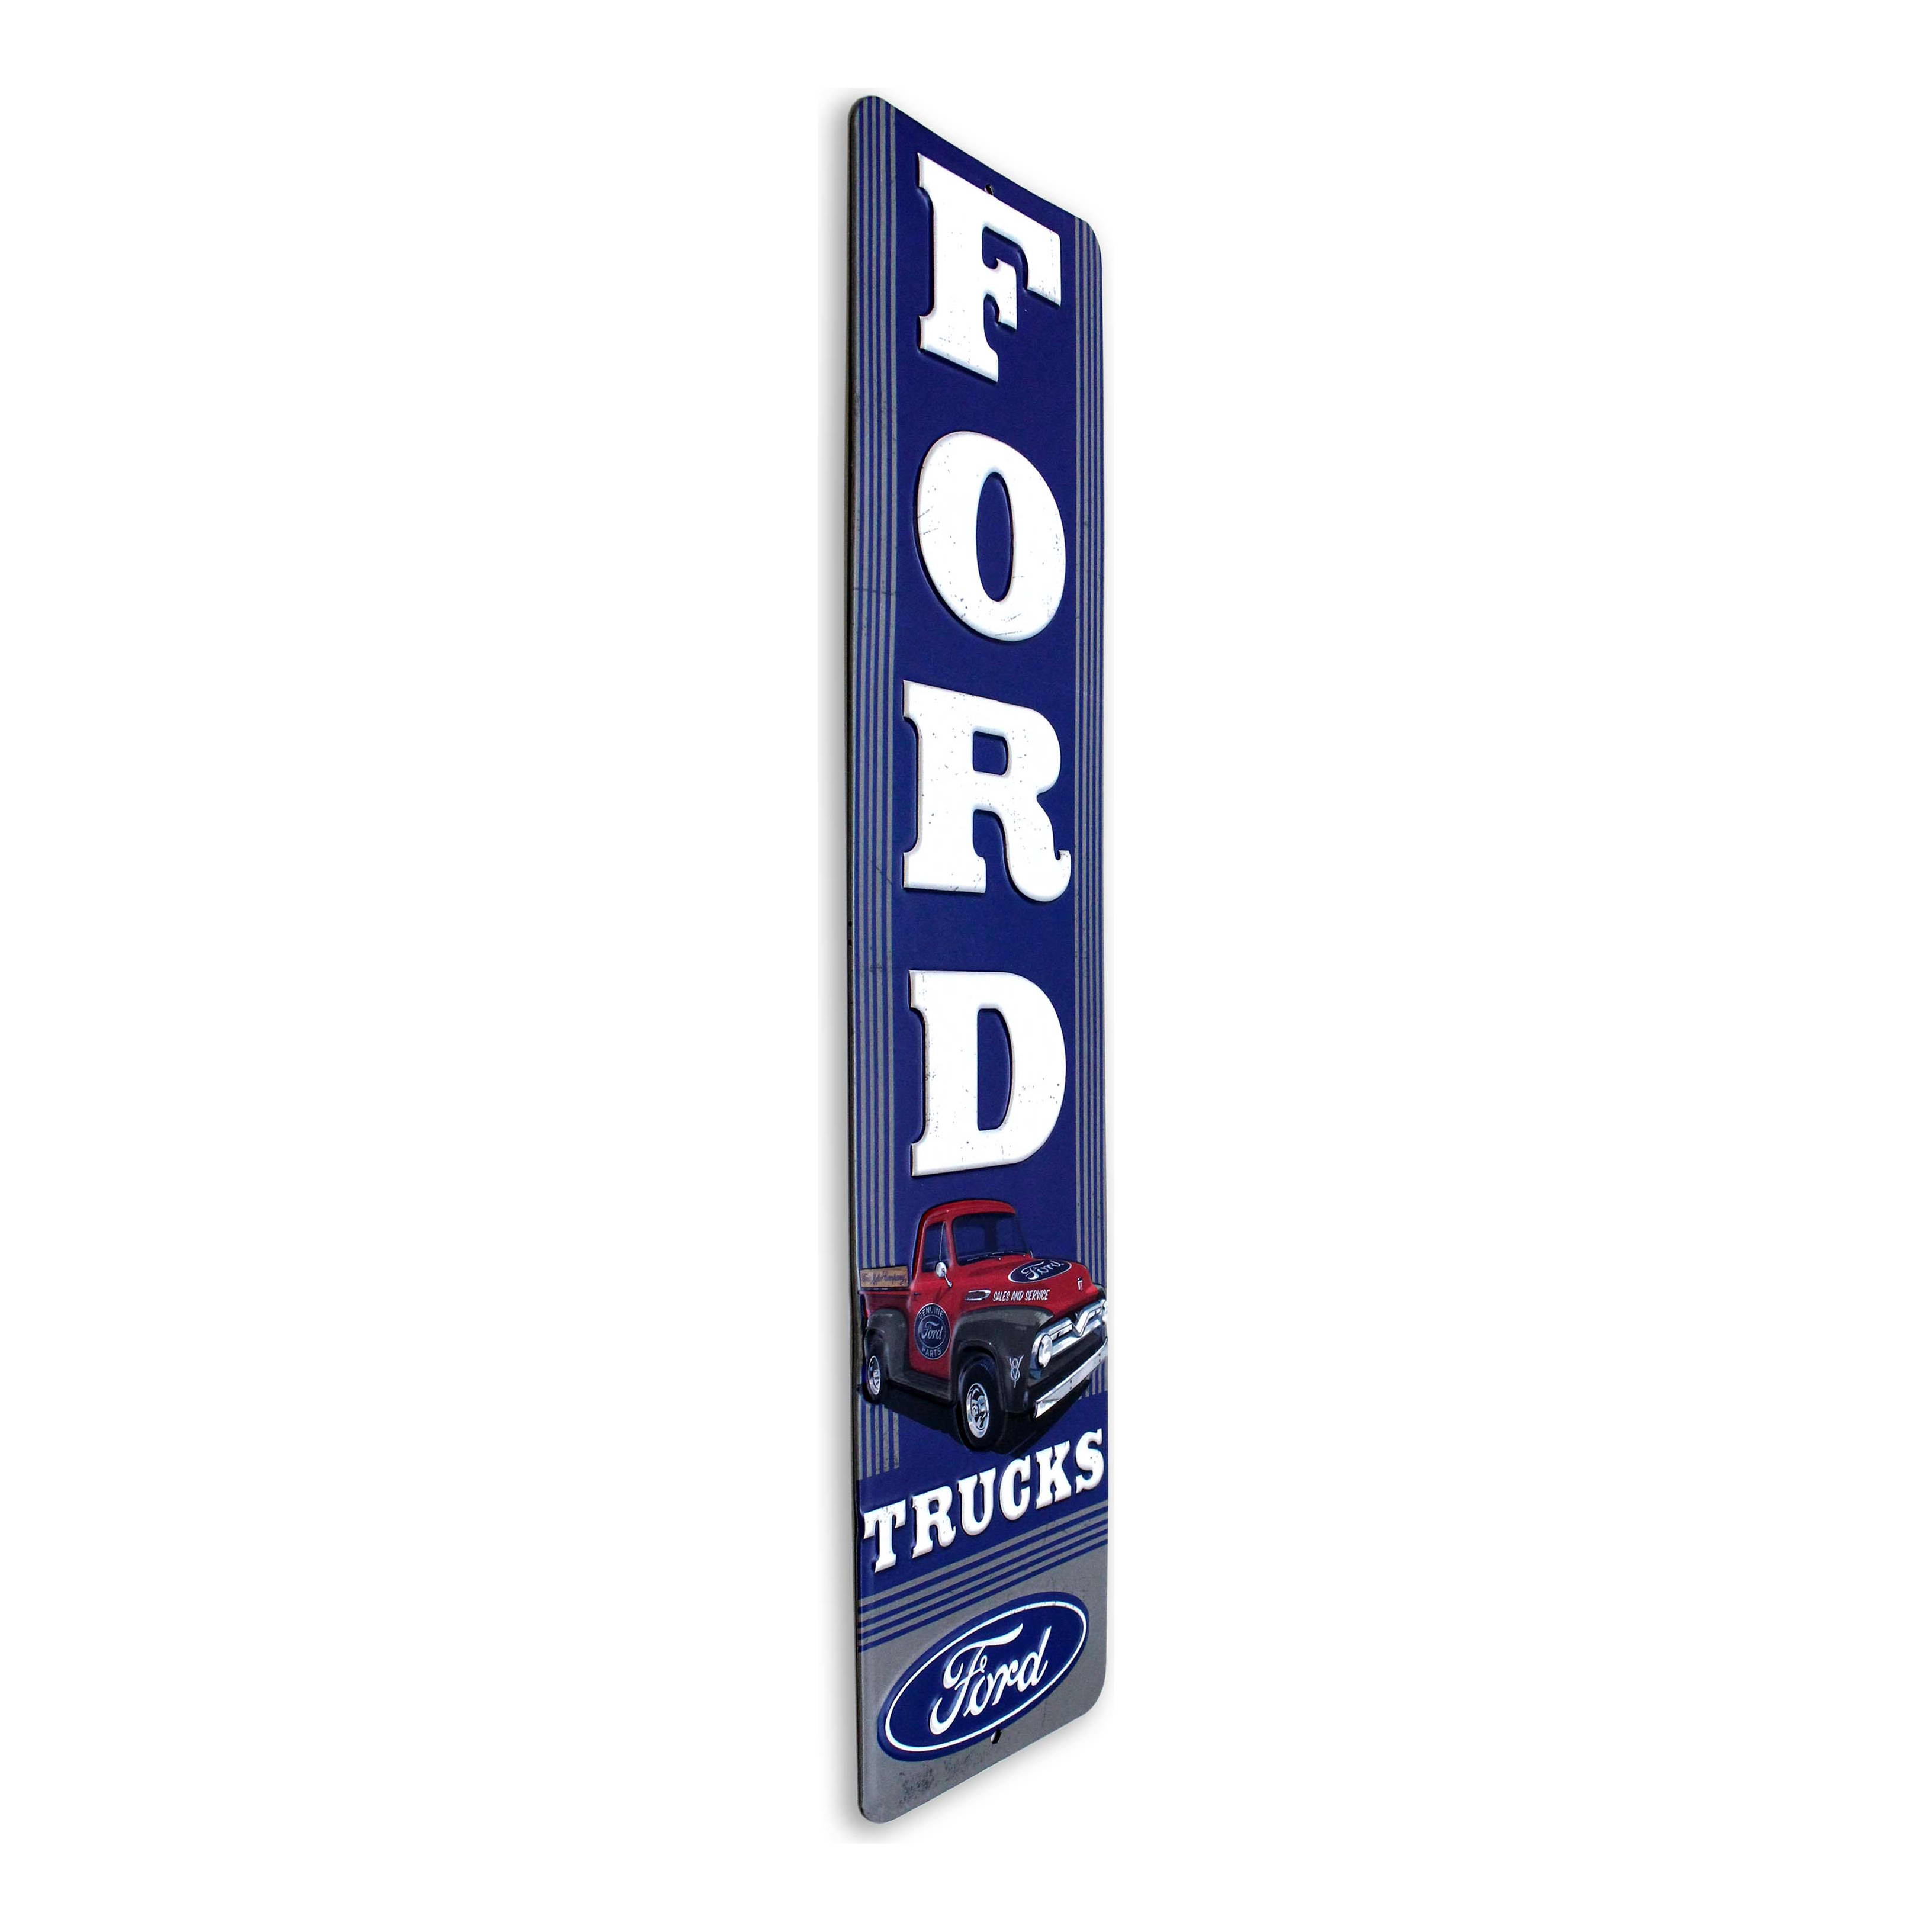 Open Road's Ford Trucks Vertical Metal Sign